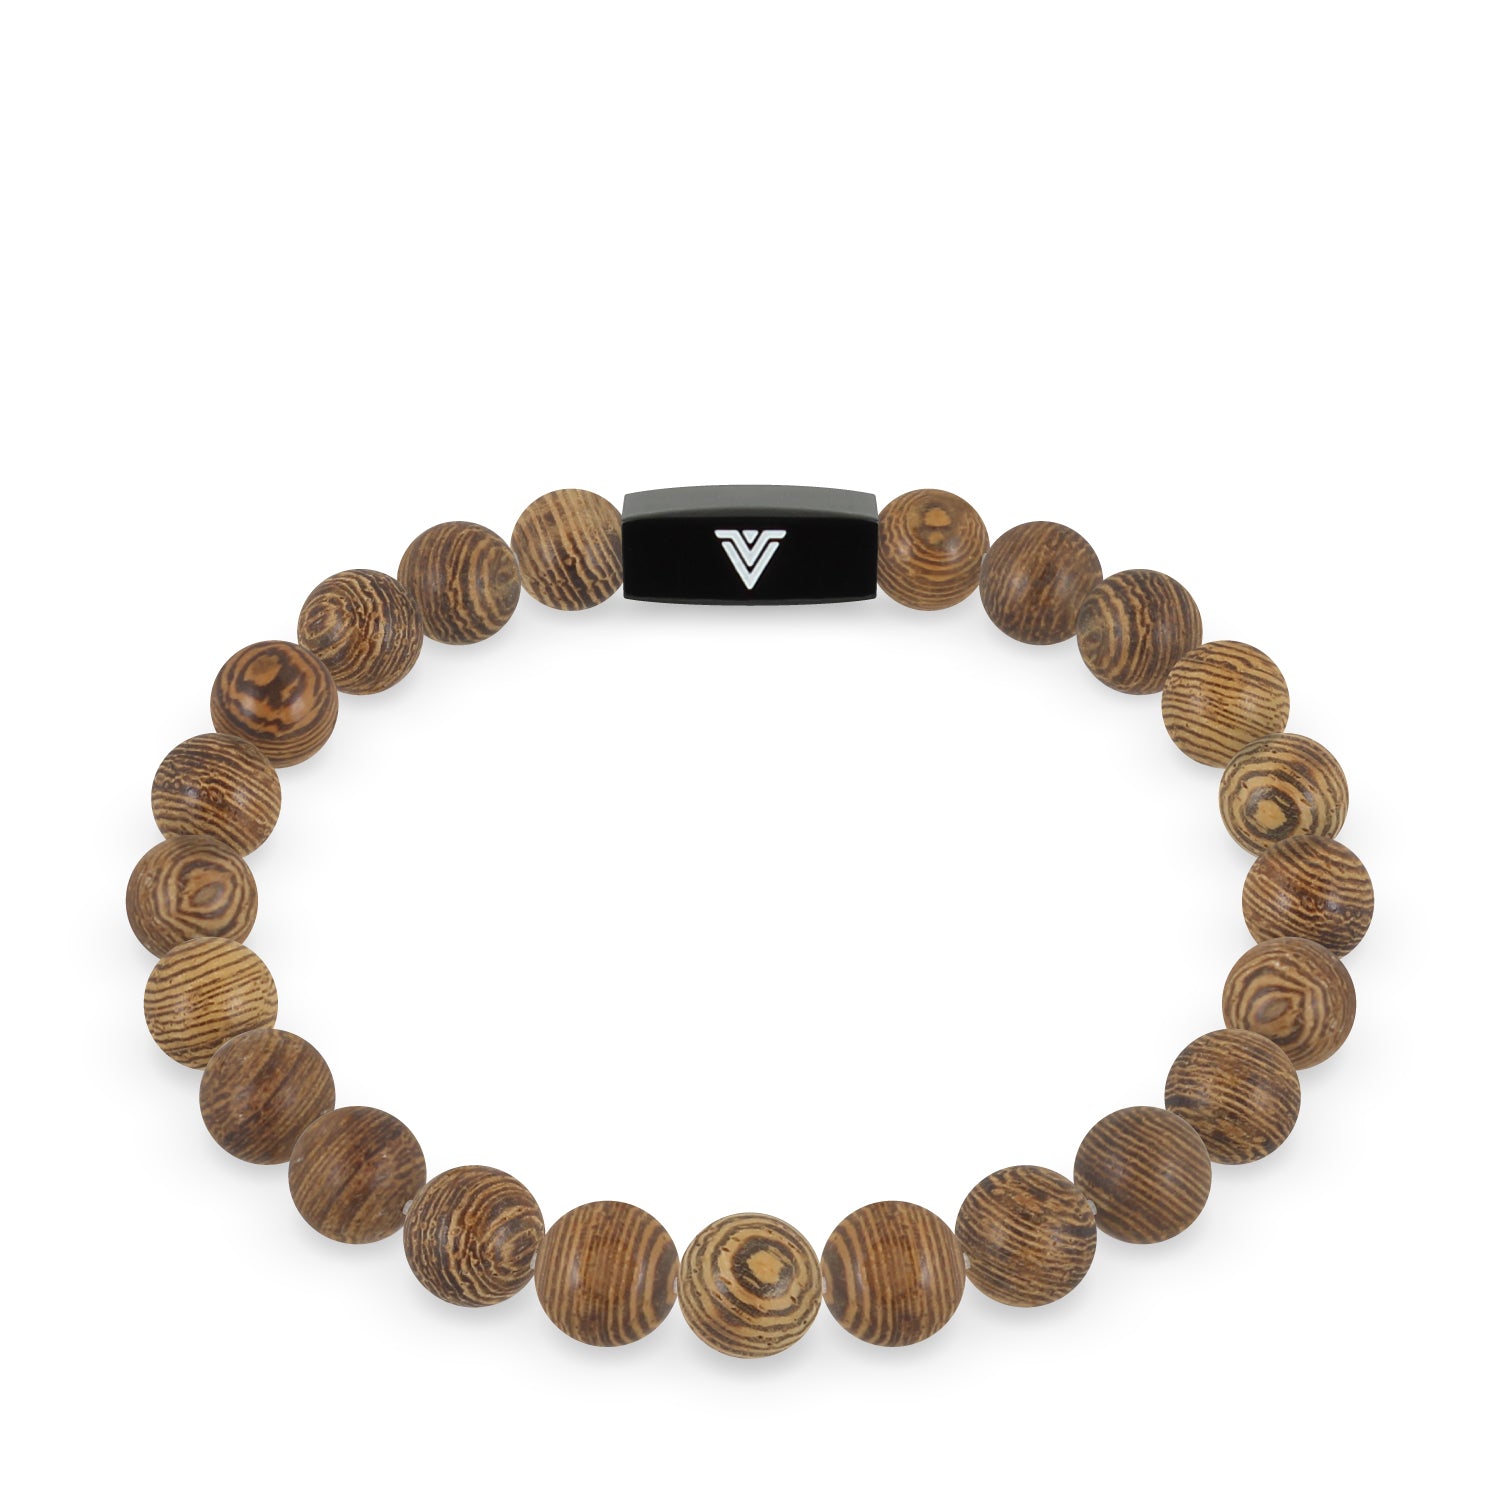 Front view of an 8mm Wood crystal beaded stretch bracelet with black stainless steel logo bead made by Voltlin